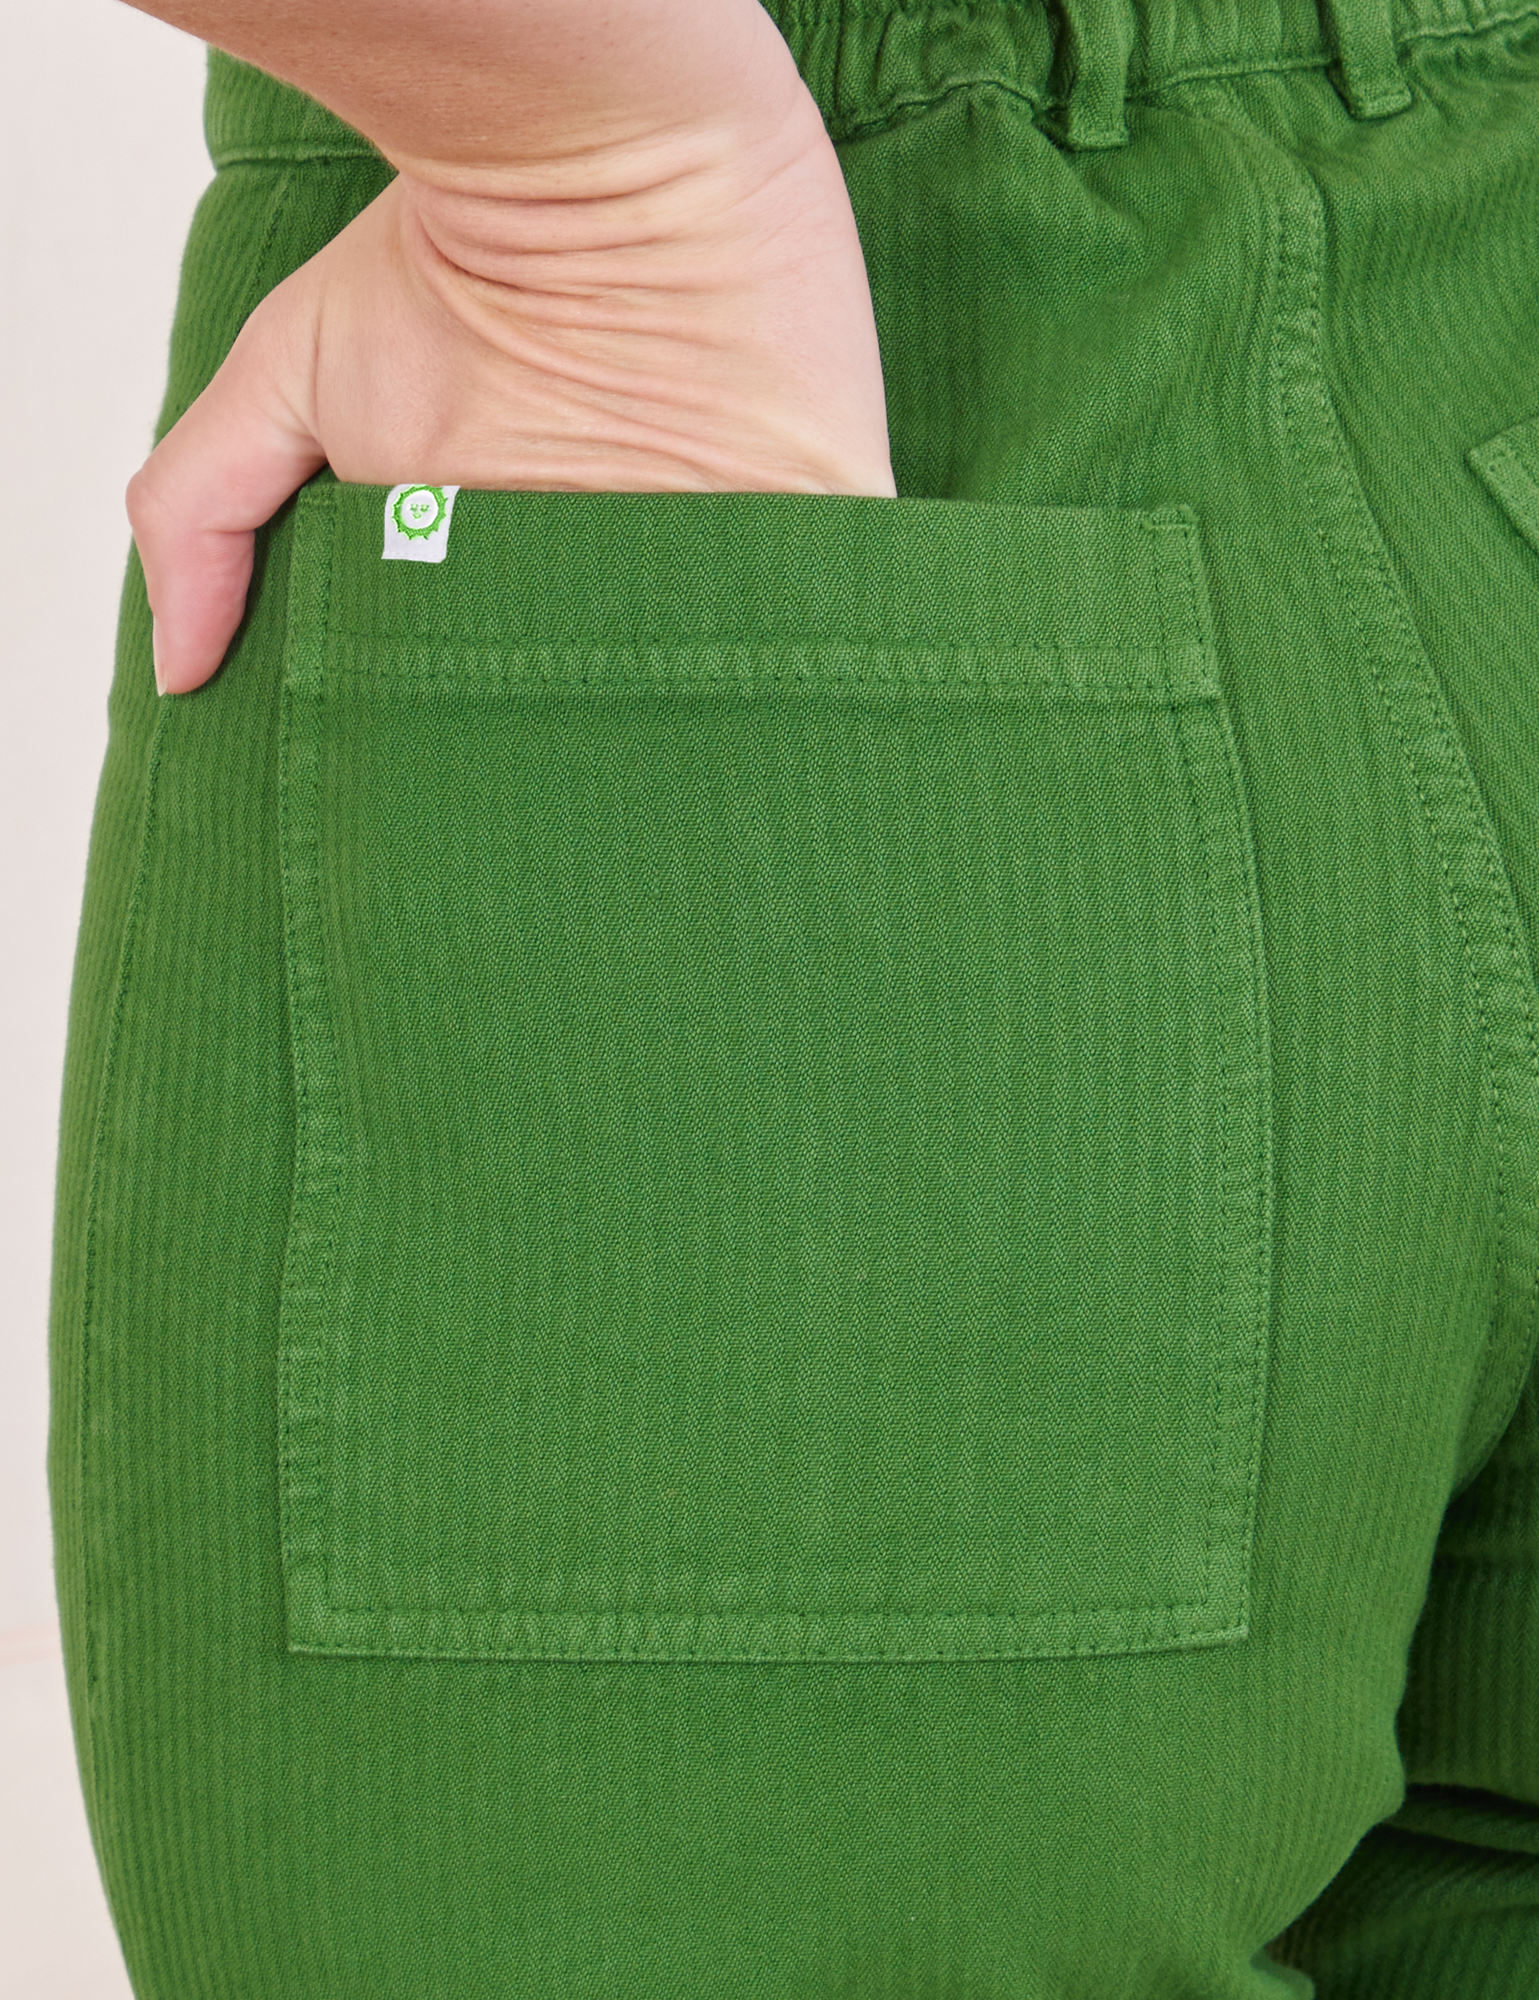 Heritage Westerns in Lawn Green back pocket close up. Alex has her hand in the pocket.